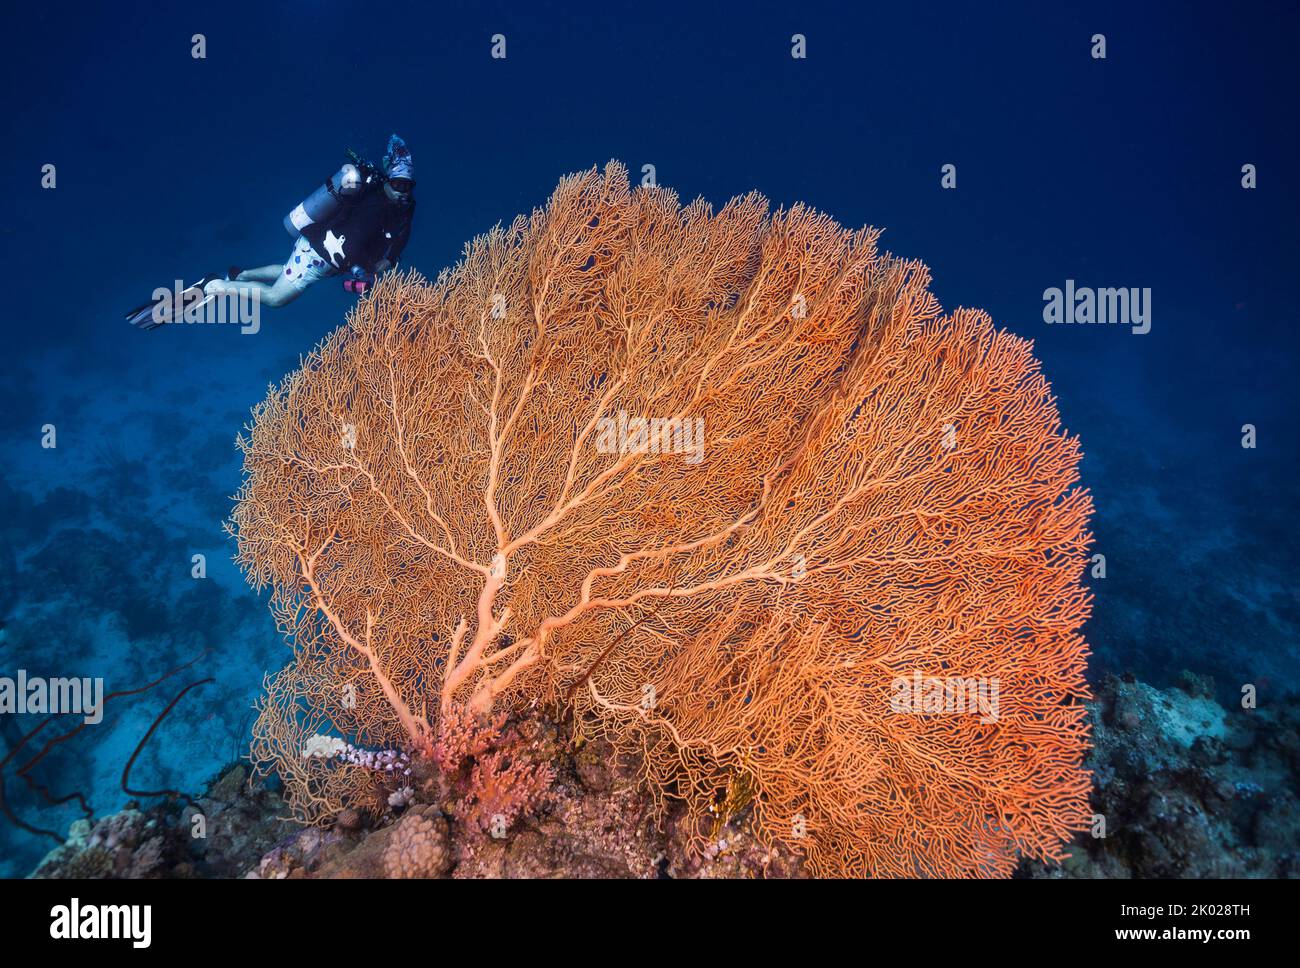 A large orange Giant sea fan (Anella mollis) growing in the deep with a scuba diver in the background Stock Photo